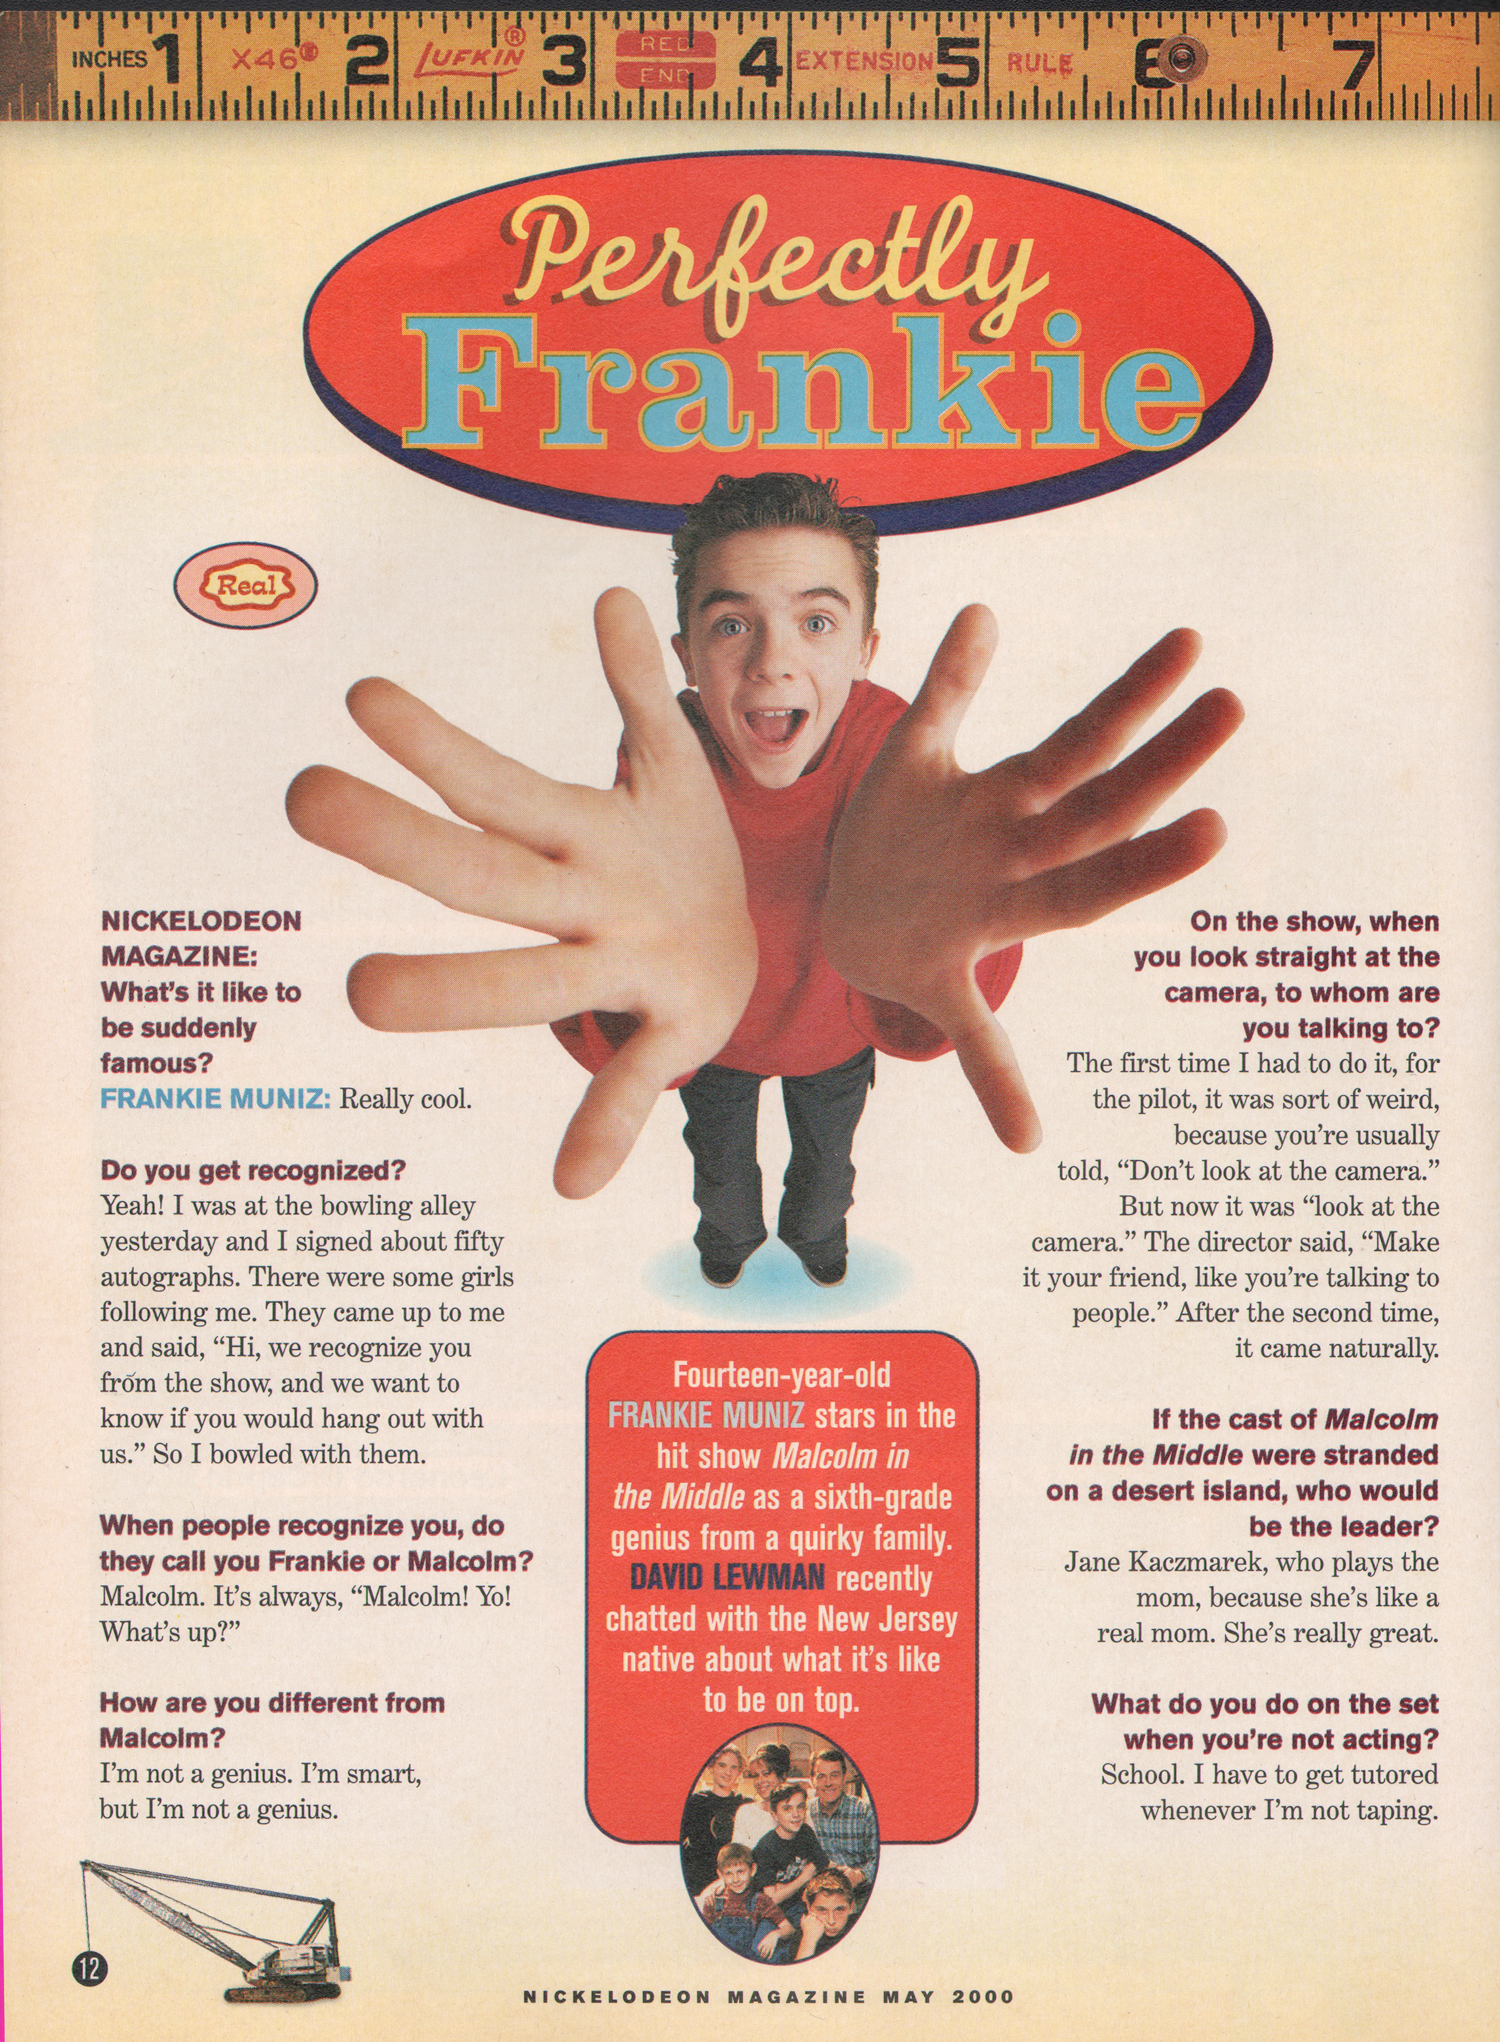 Frankie Muniz feature and cover in 'Nickelodeon' magazine, May 2000